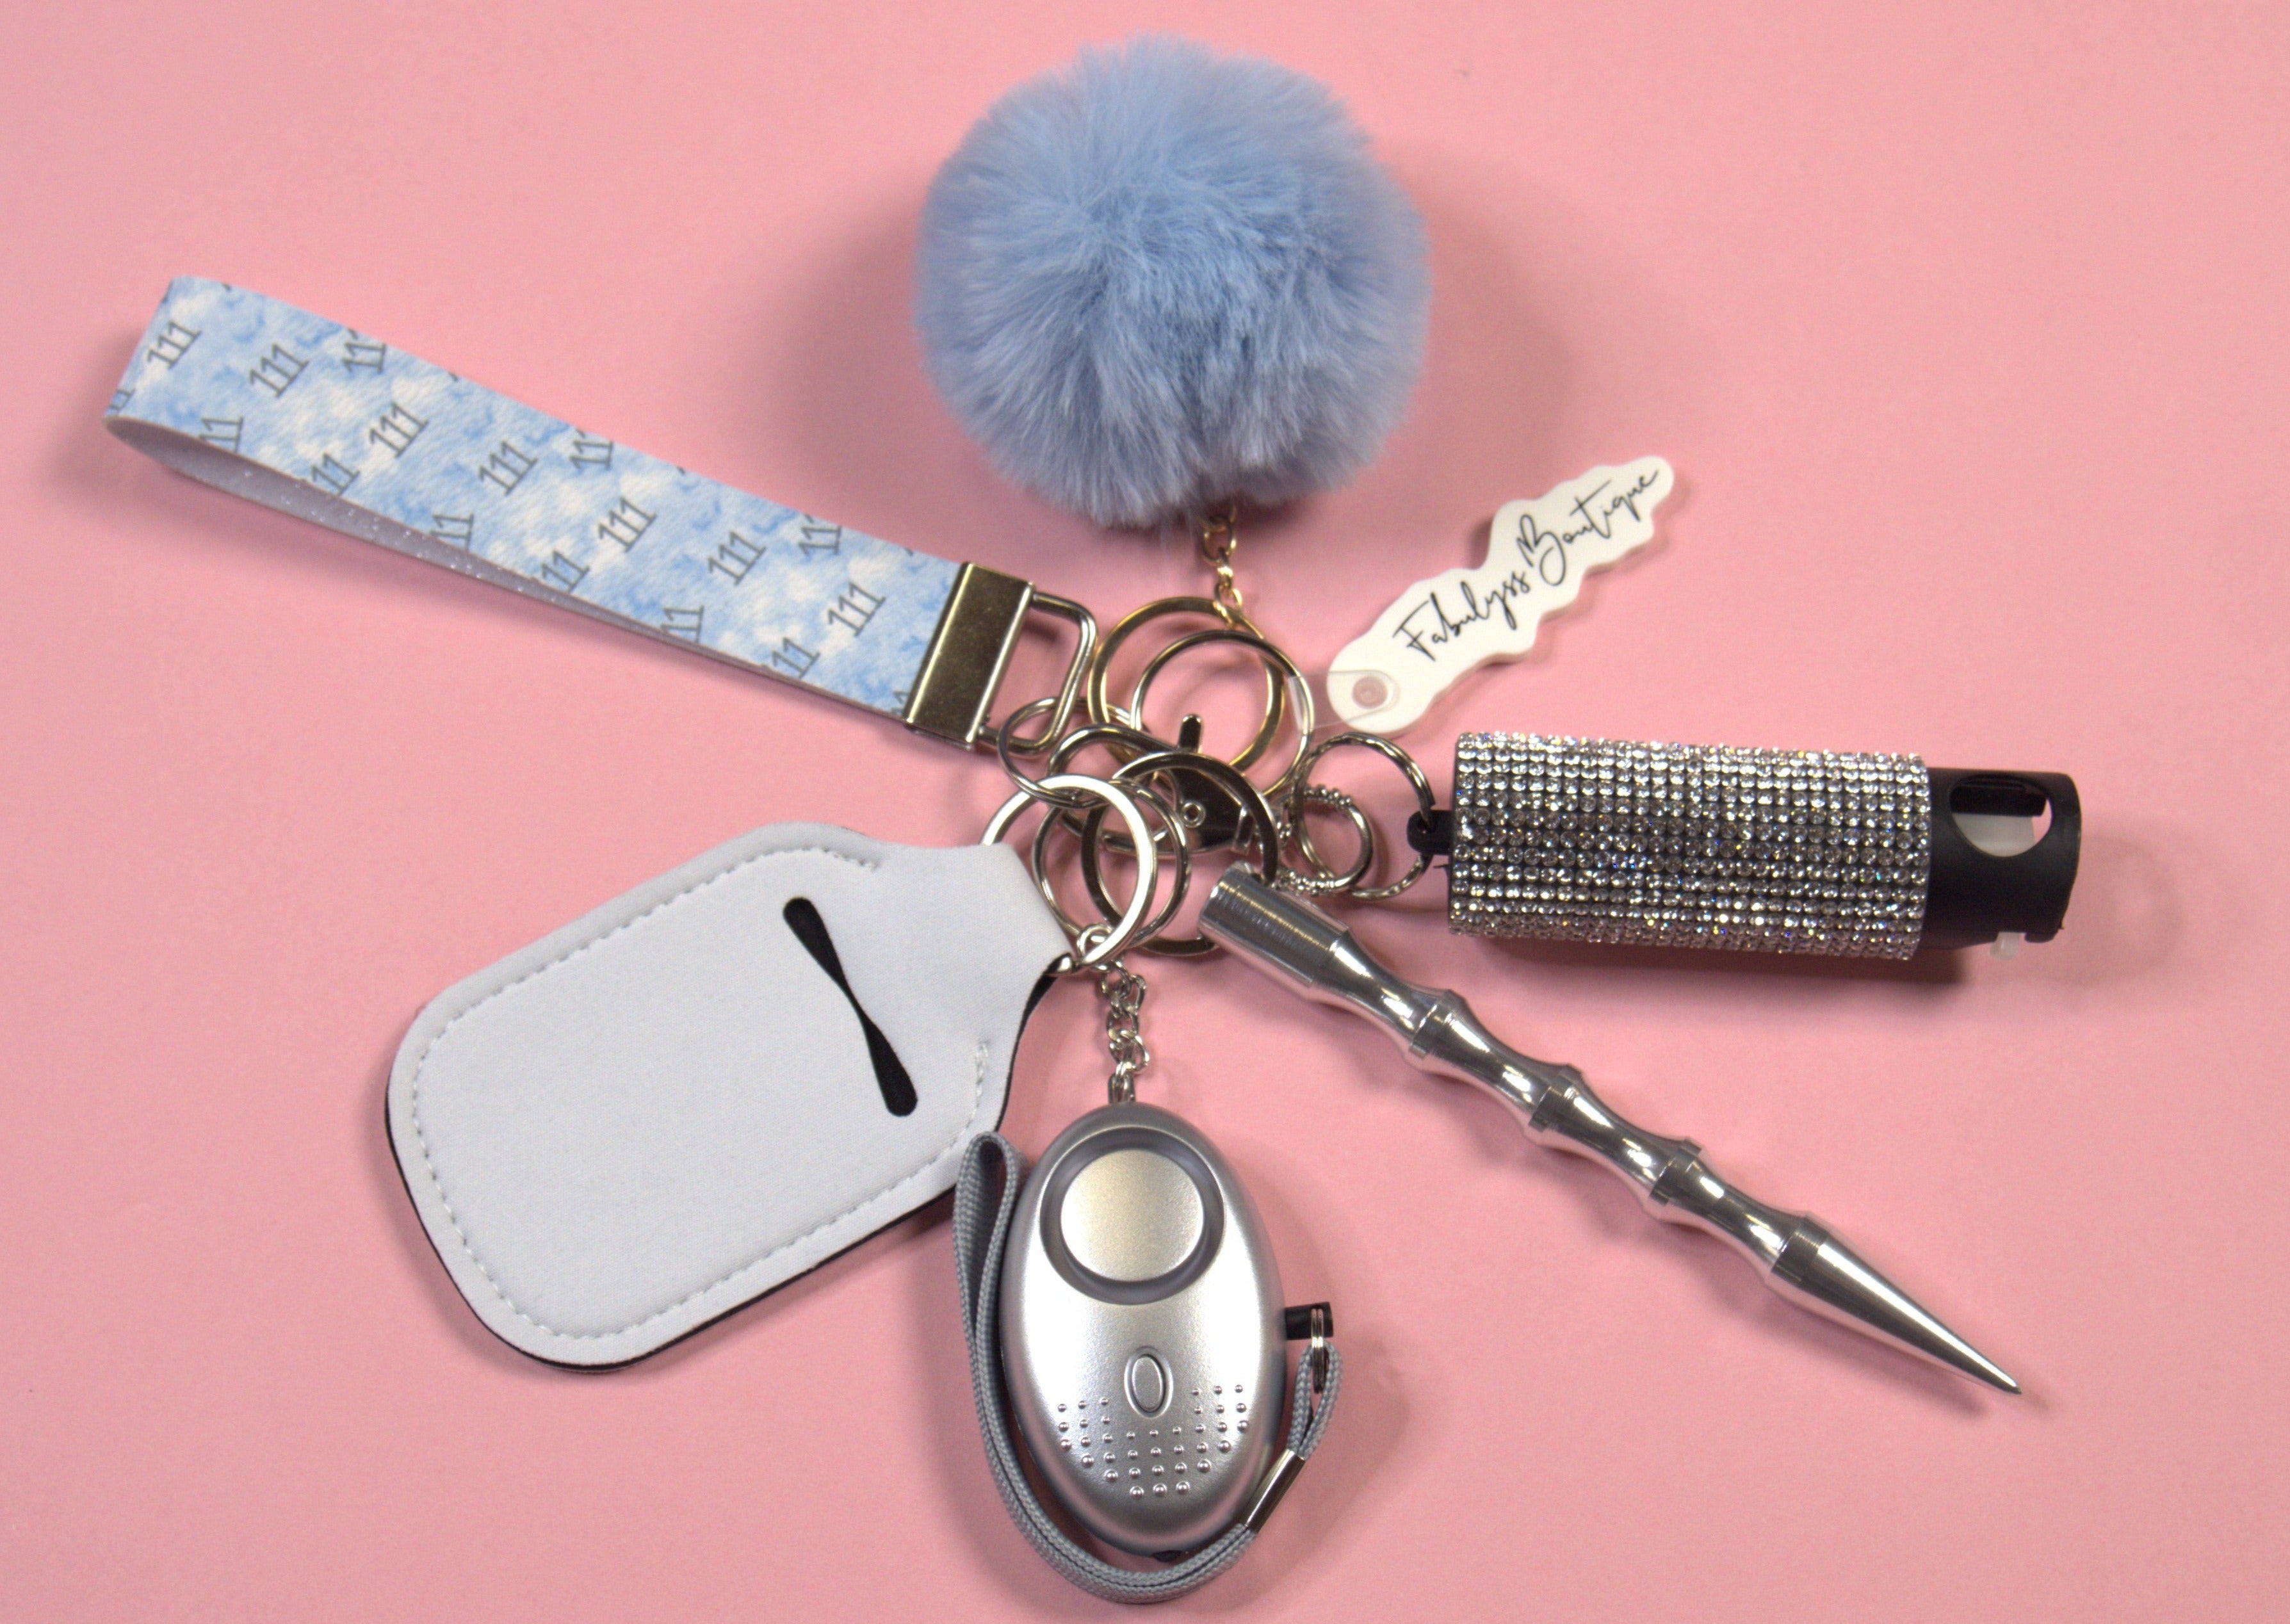 Safety First Boutique - New pink and white sparkle safety keychain